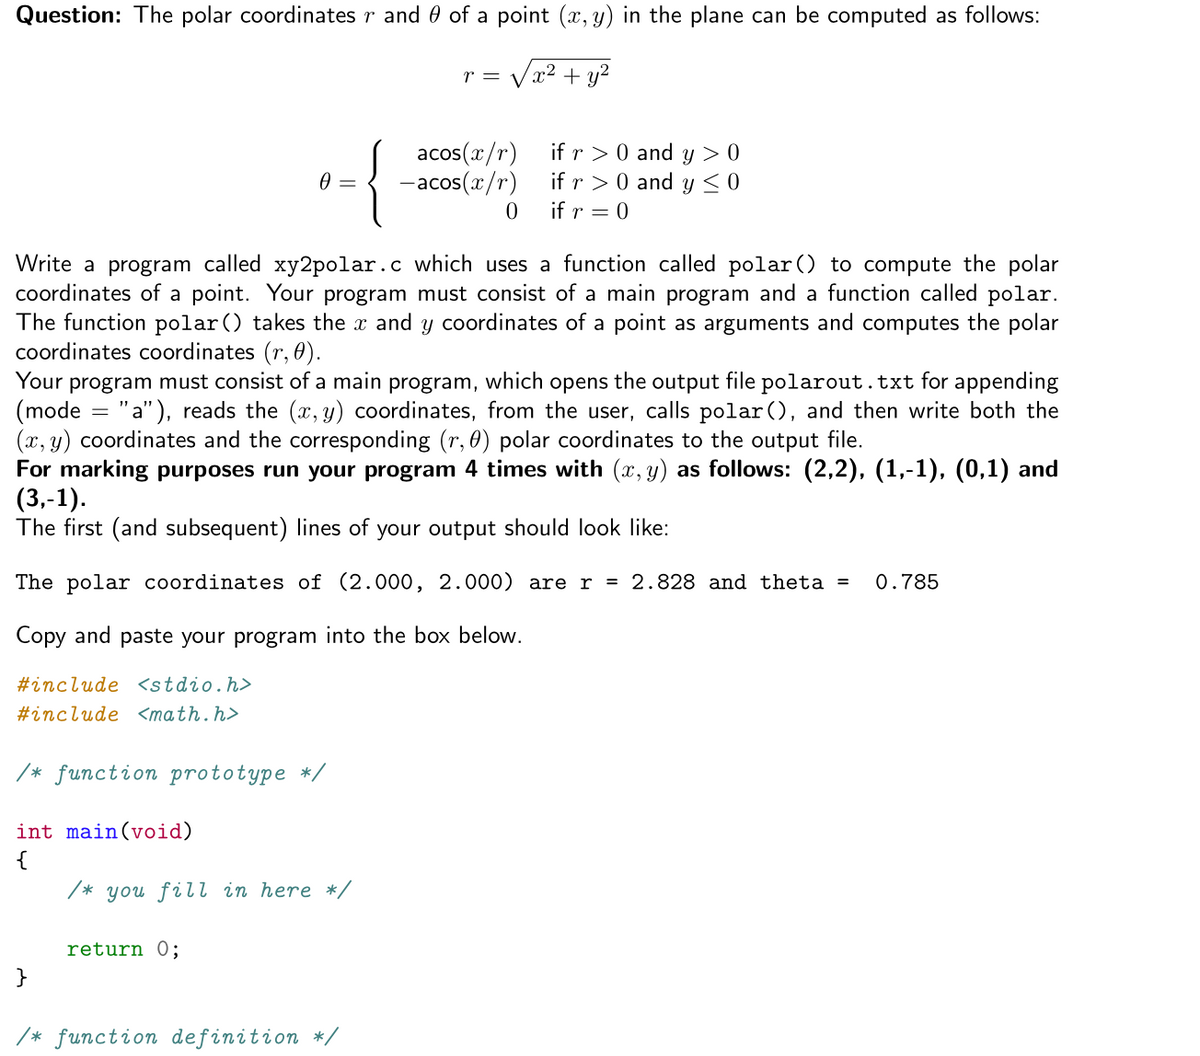 Question: The polar coordinates r and 0 of a point (x, y) in the plane can be computed as follows:
r = Vx2 + u?
{
acos(x/r)
-acos(x/r)
if r > 0 and y > 0
if r > 0 and y< 0
if r = 0
Write a program called xy2polar.c which uses a function called polar() to compute the polar
coordinates of a point. Your program must consist of a main program and a function called polar.
The function polar () takes the x and y coordinates of a point as arguments and computes the polar
coordinates coordinates (r, 0).
Your program must consist of a main program, which opens the output file polarout.txt for appending
(mode = "a"), reads the (x, y) coordinates, from the user, calls polar(), and then write both the
(x, y) coordinates and the corresponding (r, 0) polar coordinates to the output file.
For marking purposes run your program 4 times with (x, y) as follows: (2,2), (1,-1), (0,1) and
(3,-1).
The first (and subsequent) lines of your output should look like:
The polar coordinates of (2.000, 2.000) are r = 2.828 and theta =
0.785
Copy and paste your program into the box below.
#include <stdio.h>
#include <math.h>
/* function prototype */
int main(void)
{
/* you fill in here */
return O;
/* function definition */
